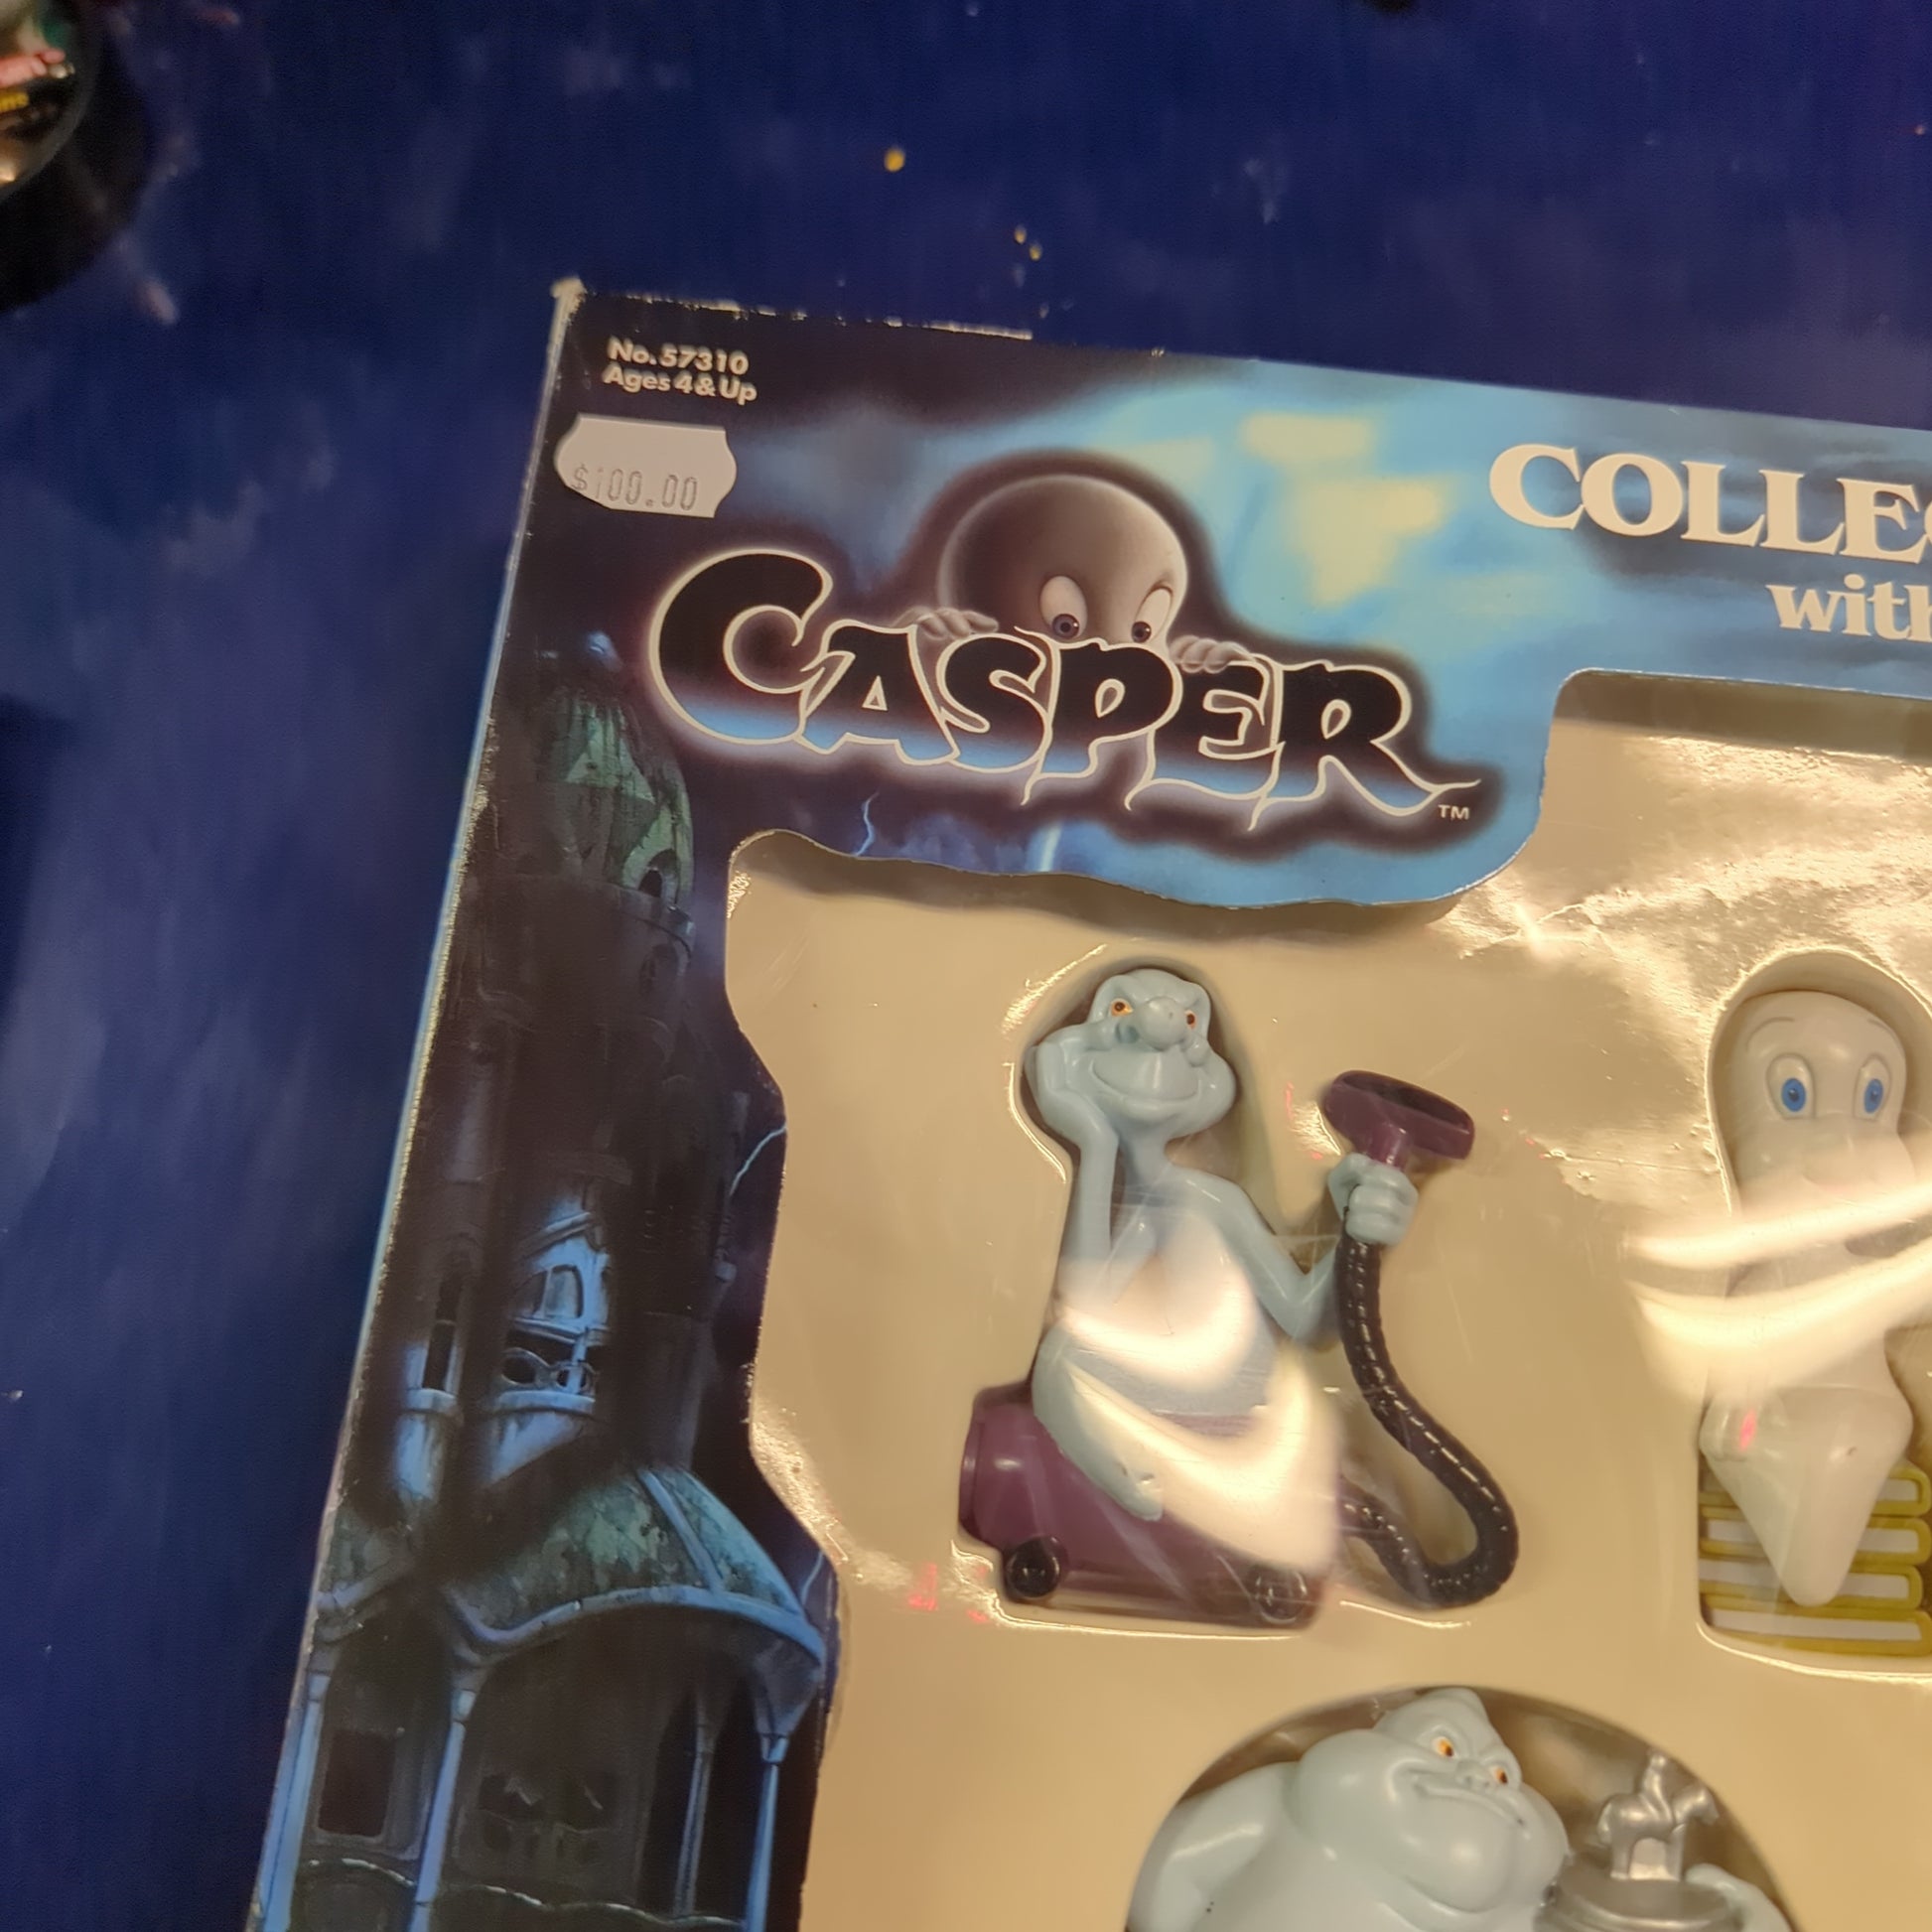 Vintage Casper Collectable Figures with Whipstaff Manor  1995 TYCO FRENLY BRICKS - Open 7 Days